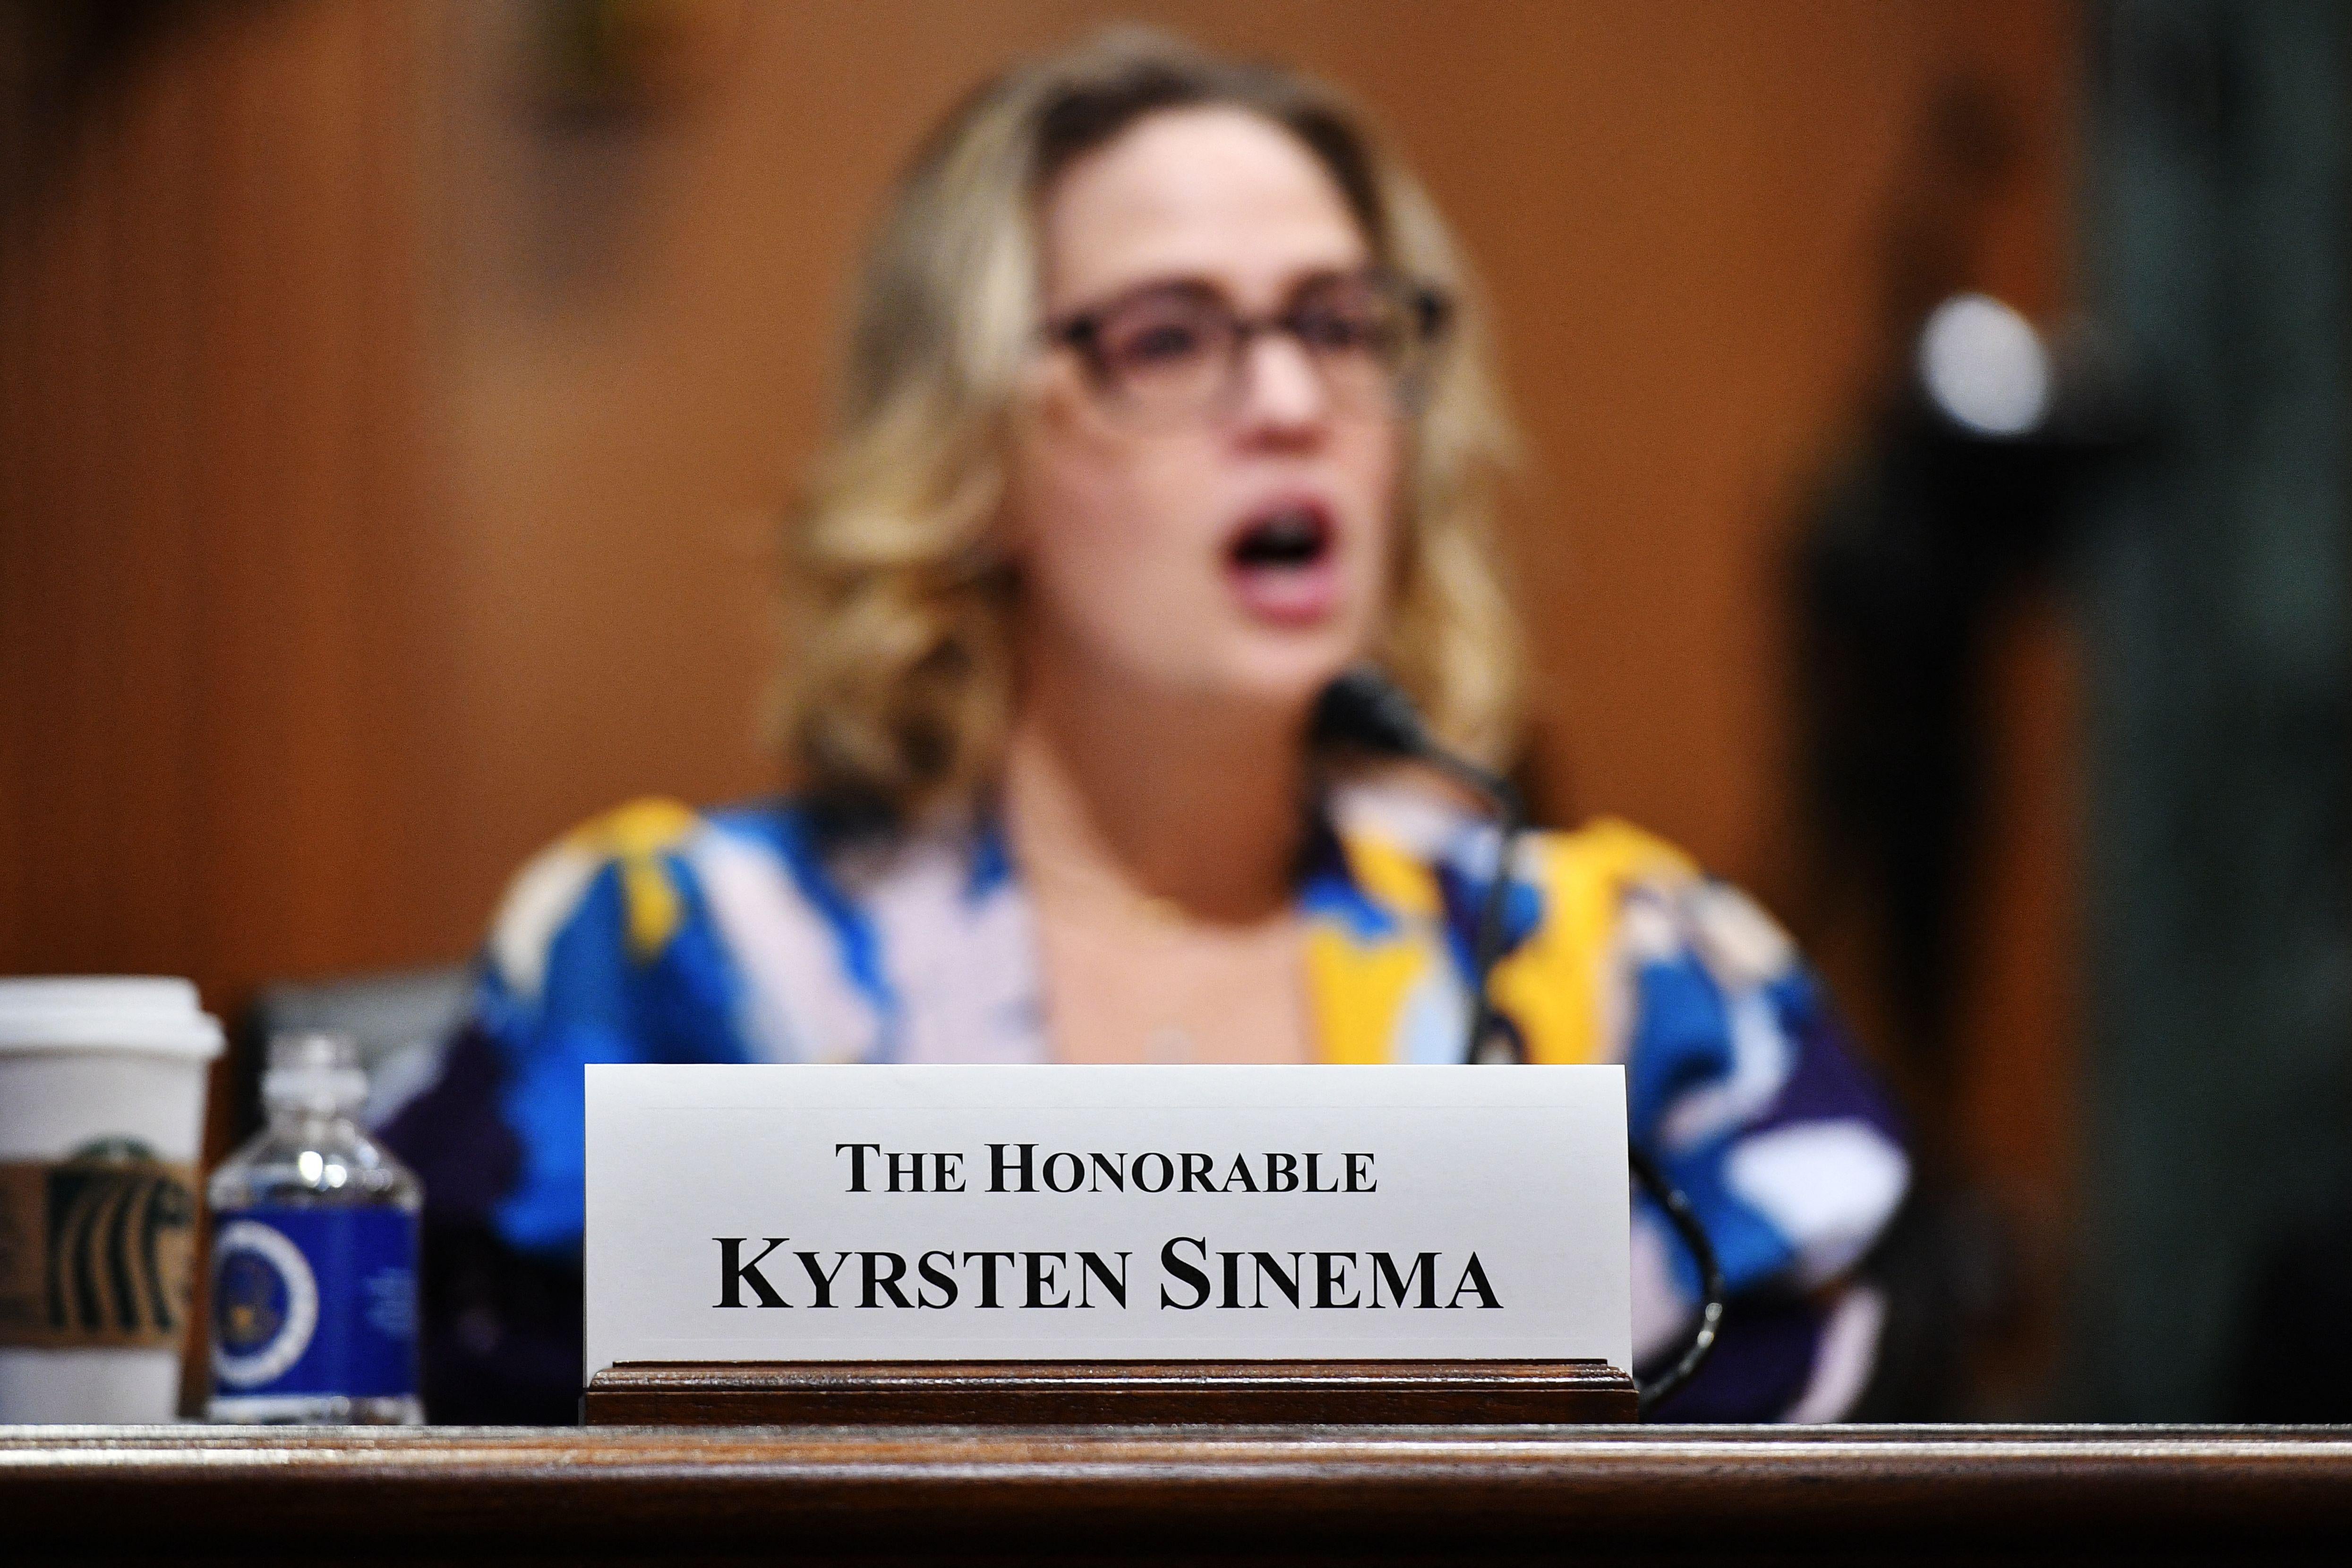 Kyrsten Sinema at a hearing, seen behind a sign on the desk that says, "The Honorable Kyrsten Sinema."